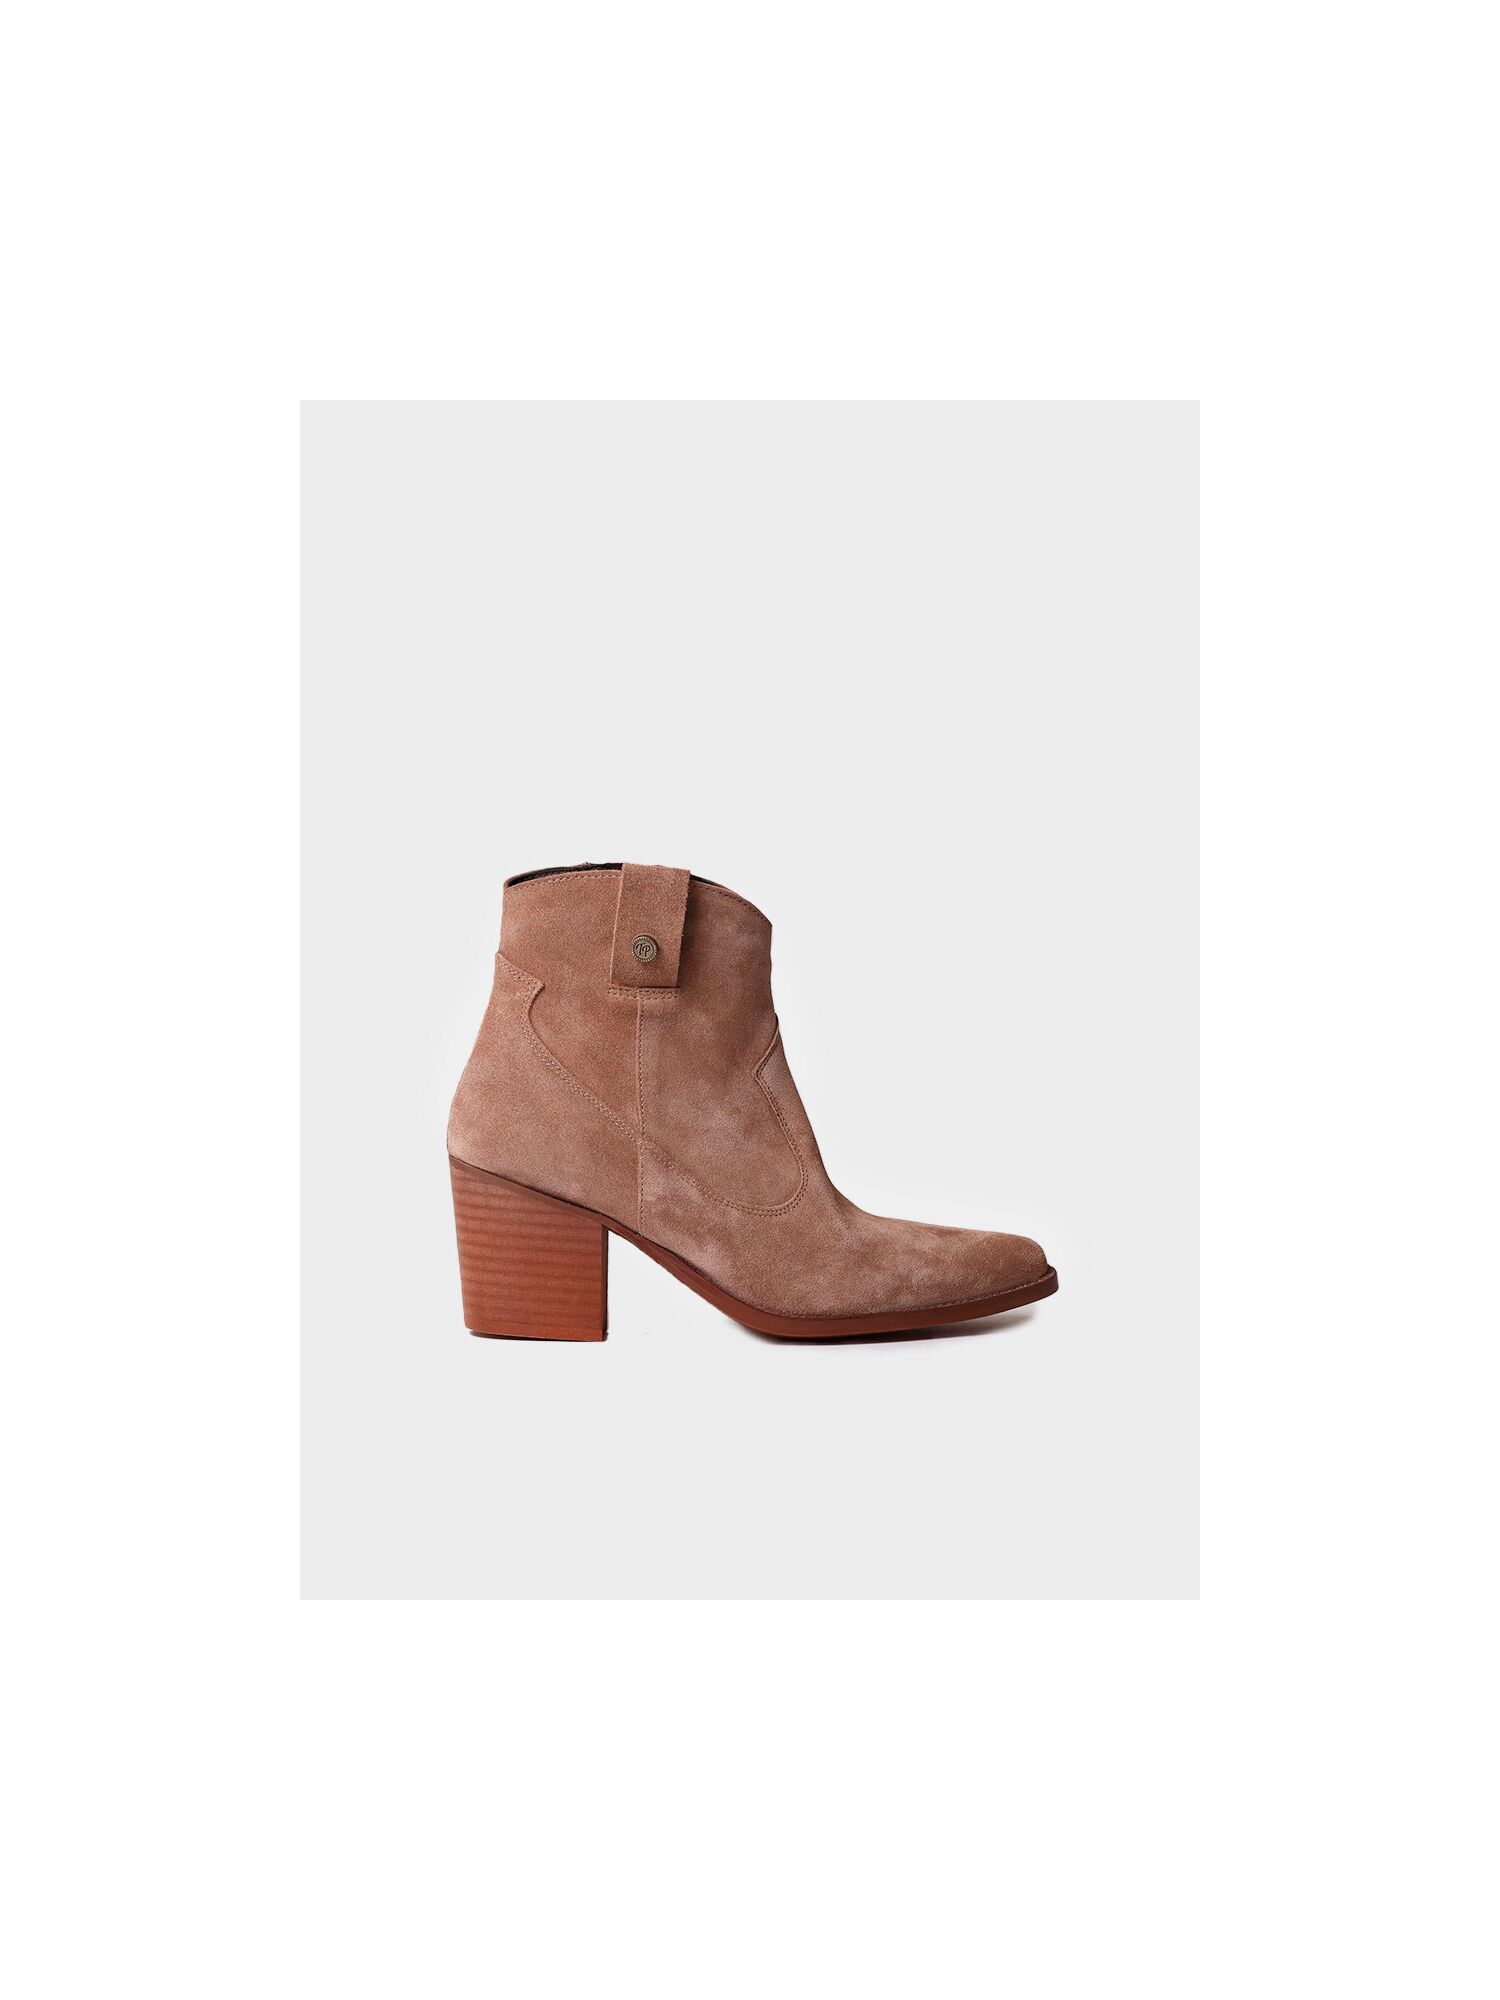 Women's Ankle boot in suede in coffee color - LORETTA-SY